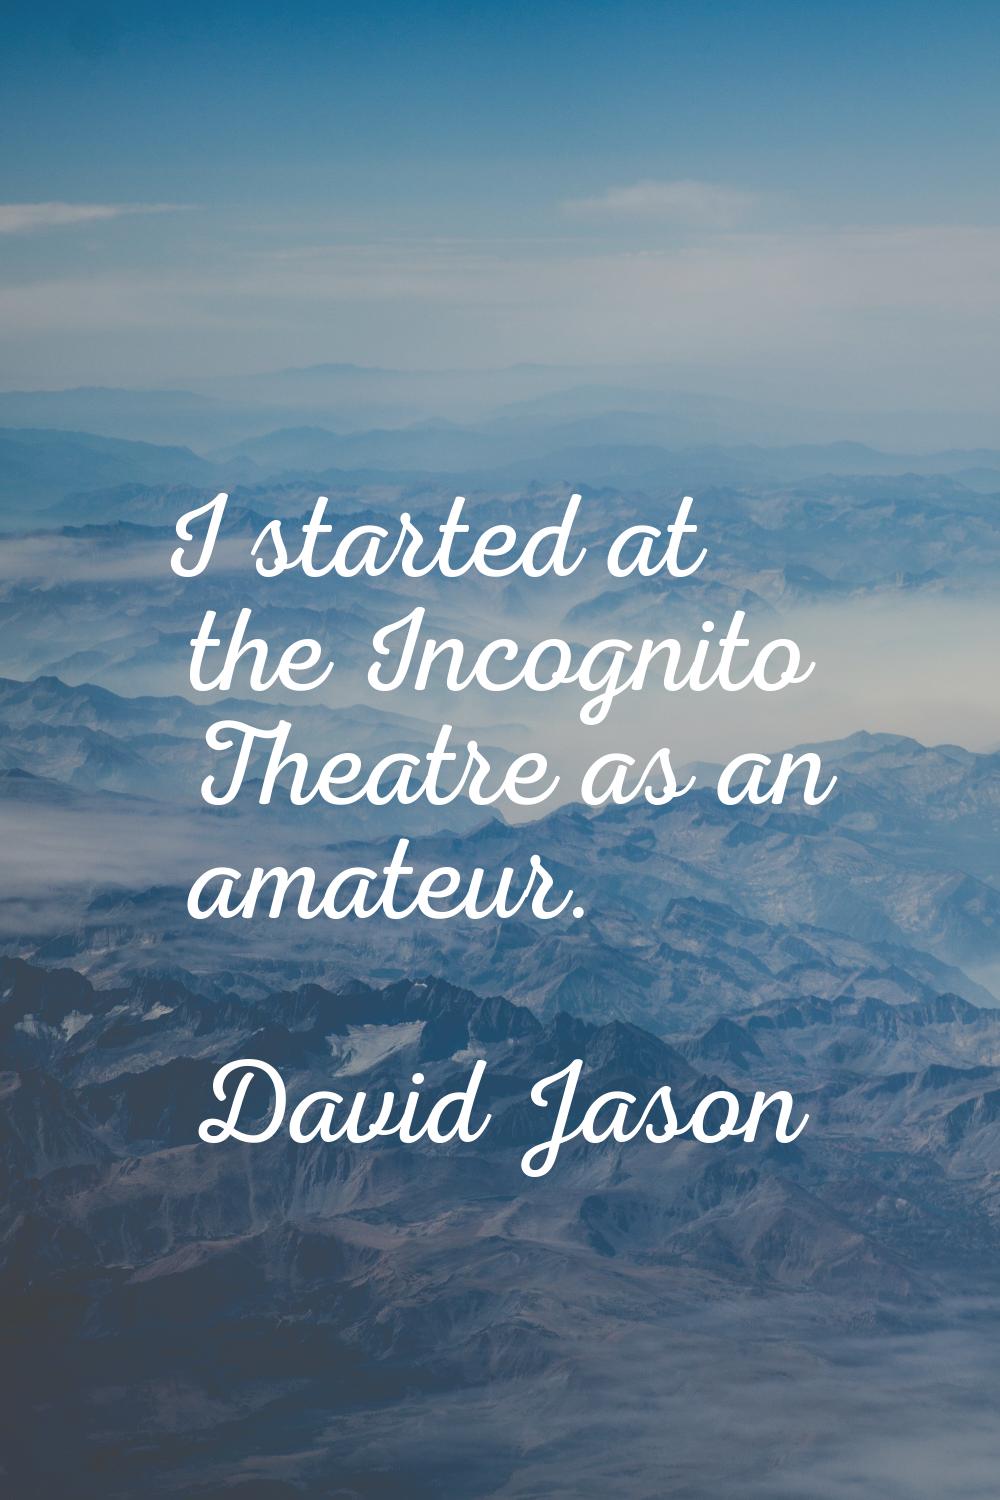 I started at the Incognito Theatre as an amateur.